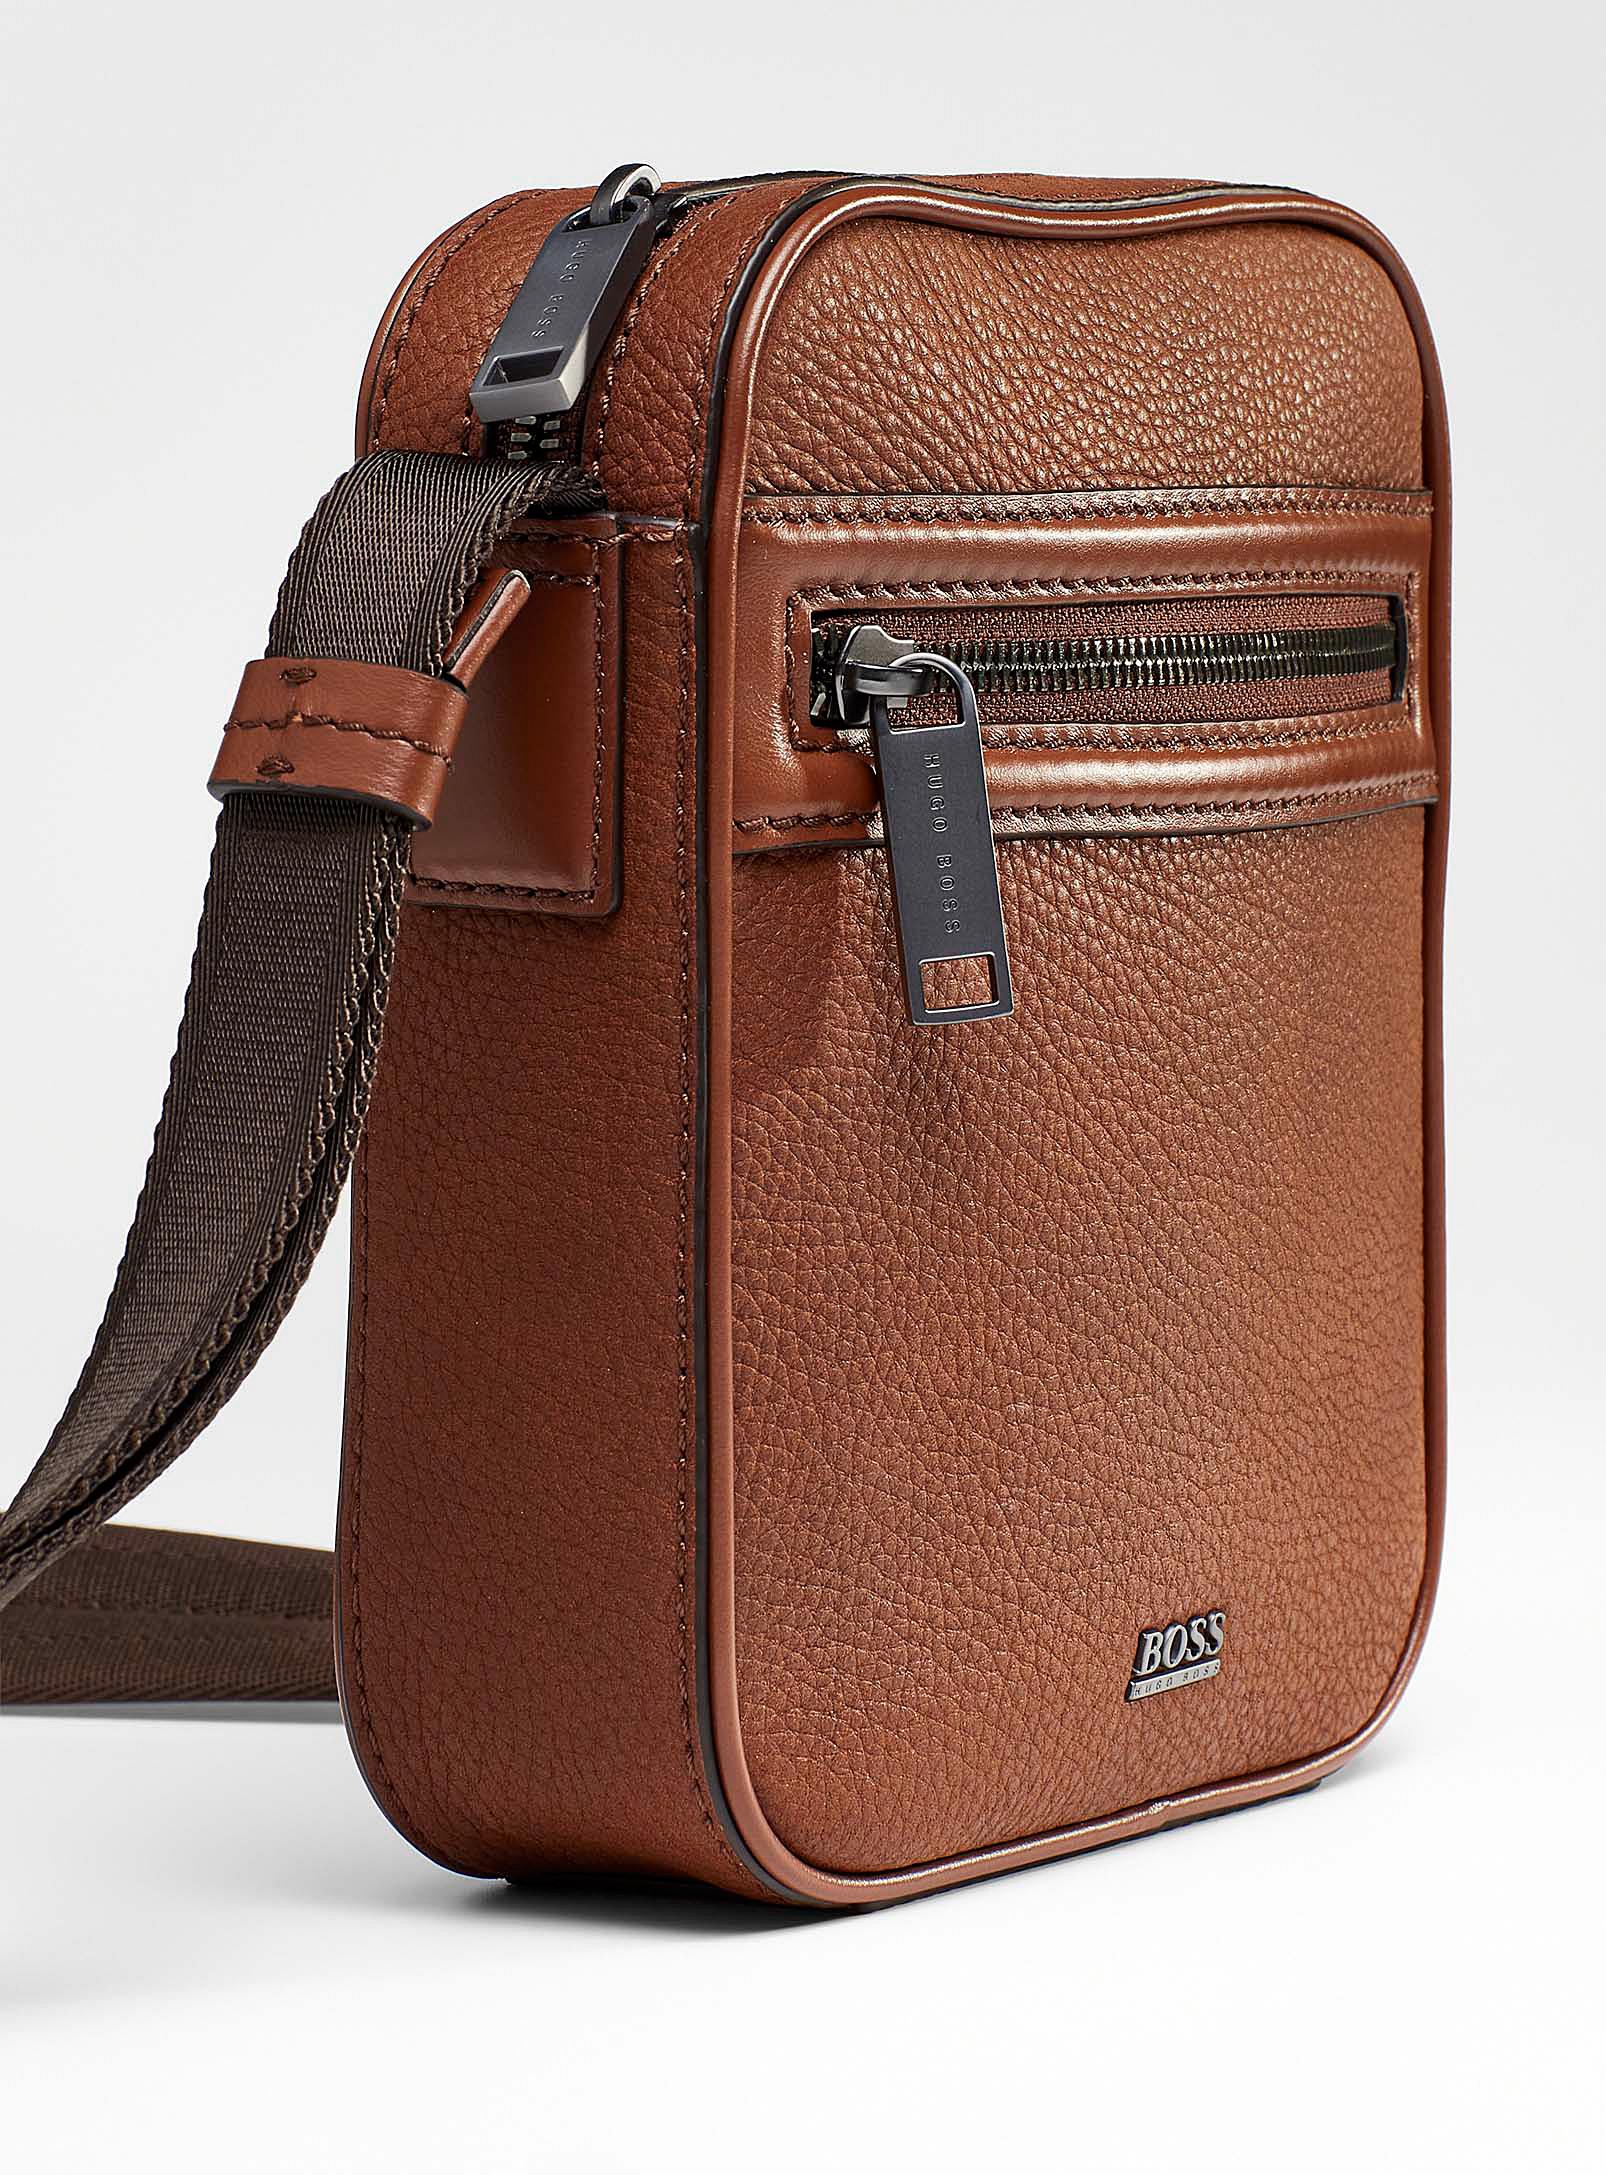 BOSS by HUGO BOSS Helios Leather Shoulder Bag in Brown for Men | Lyst